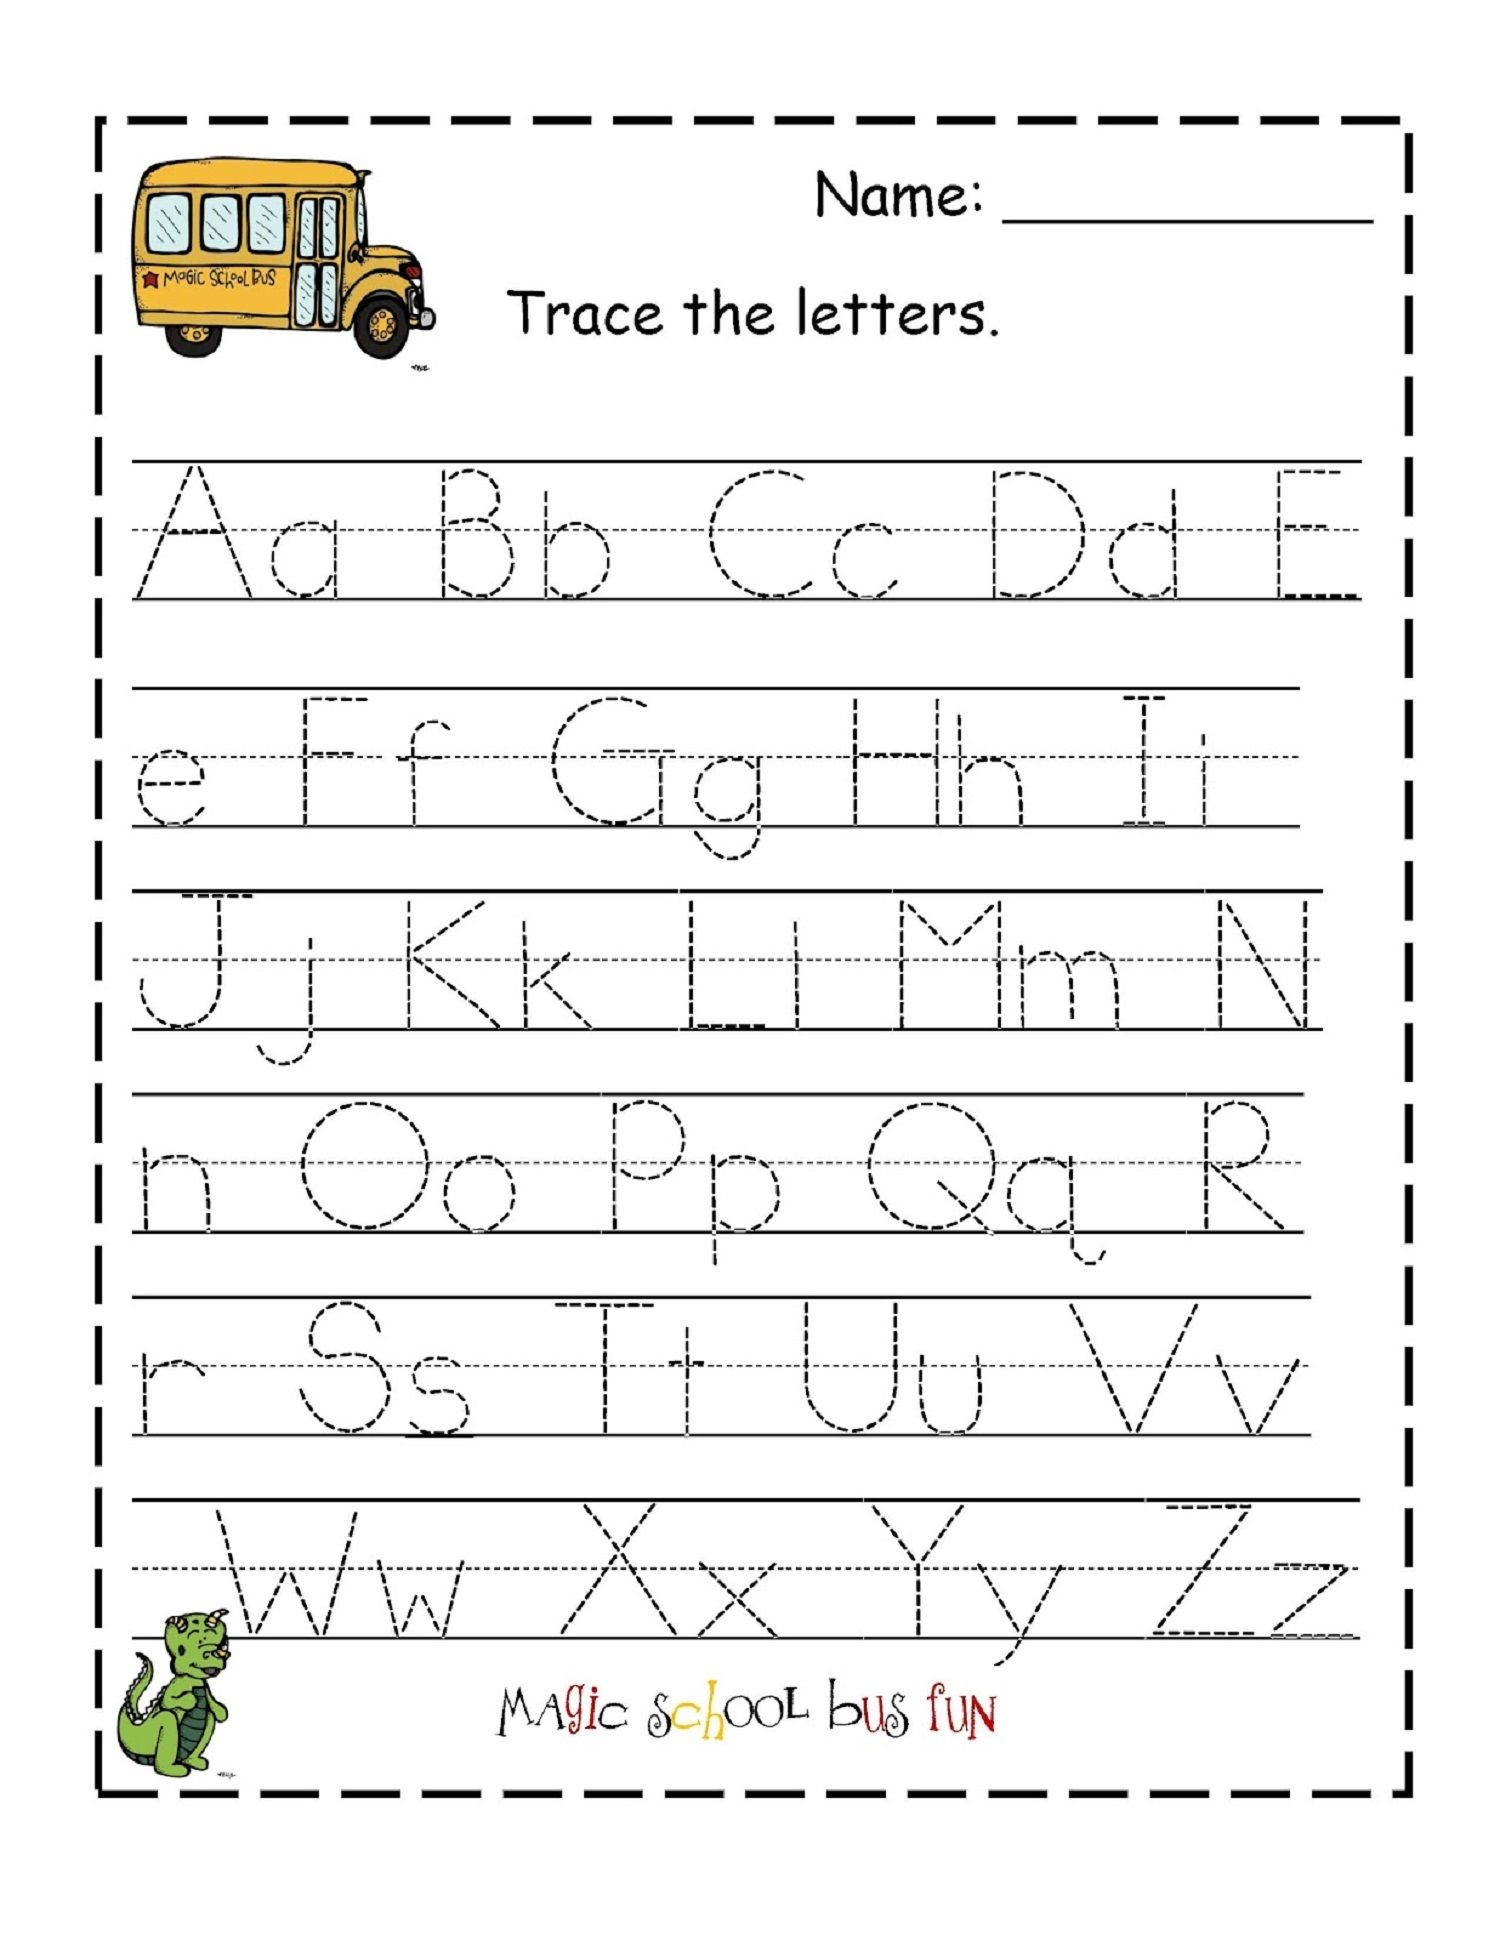 Traceable Alphabet For Learning Exercise | Letter Tracing throughout Letter Tracing Worksheets Uk